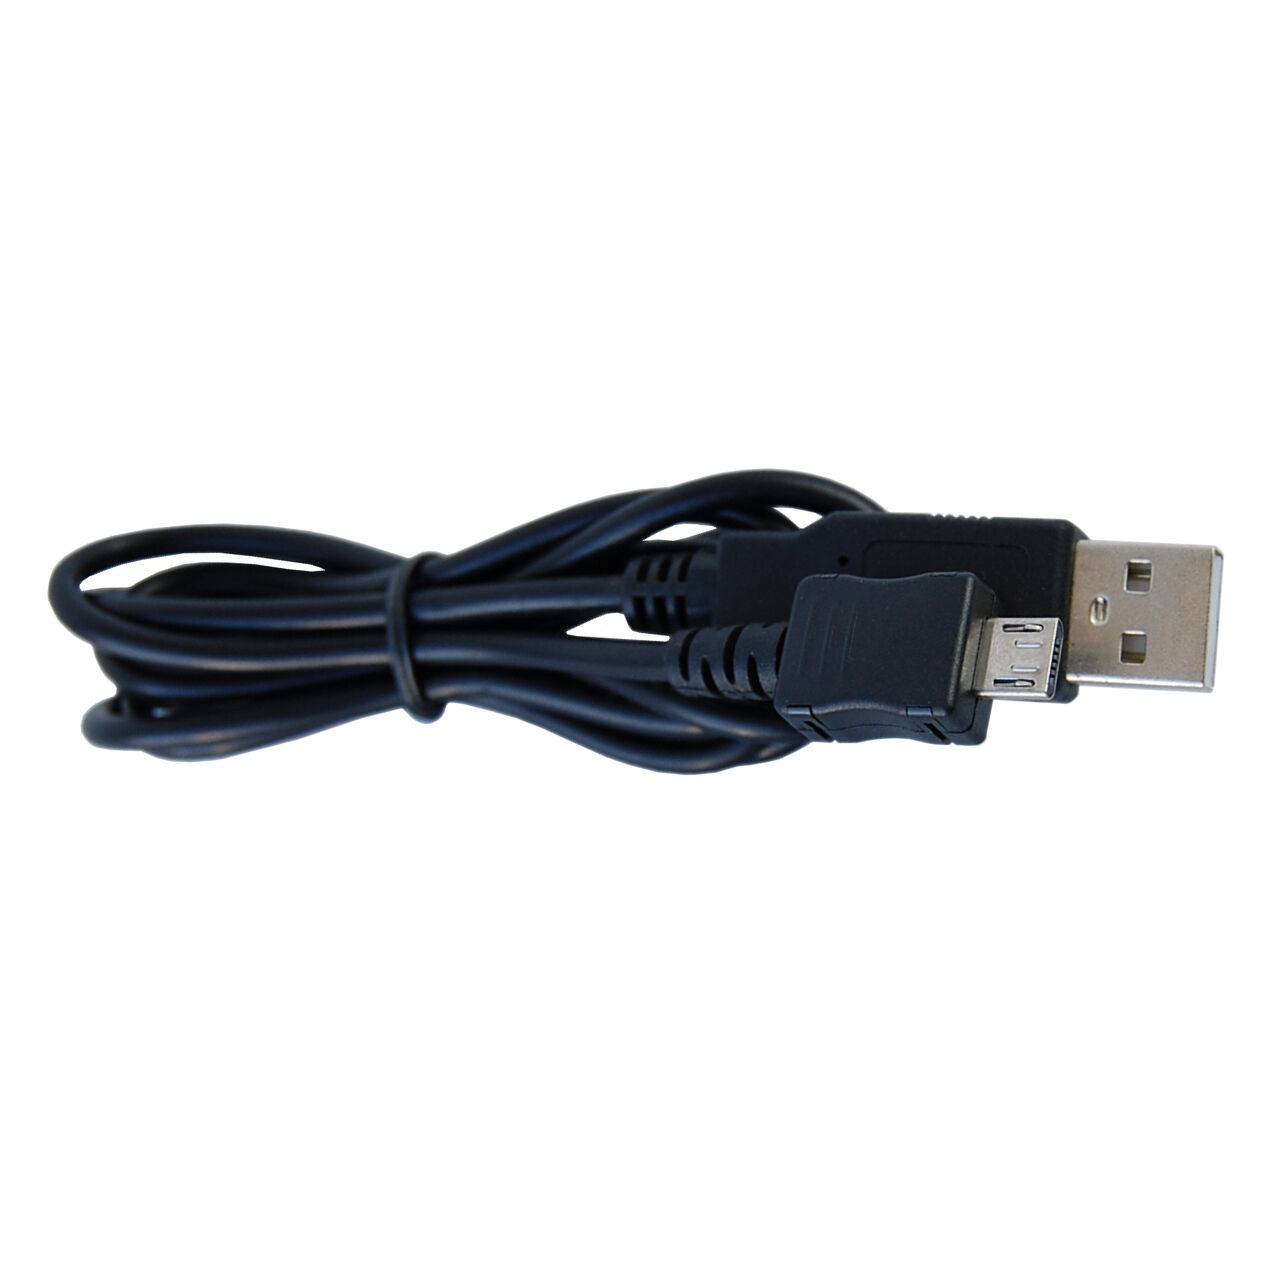 HQRP Micro USB Cable Charger for Kurio 4s Touch / 7s / 10s Tablet